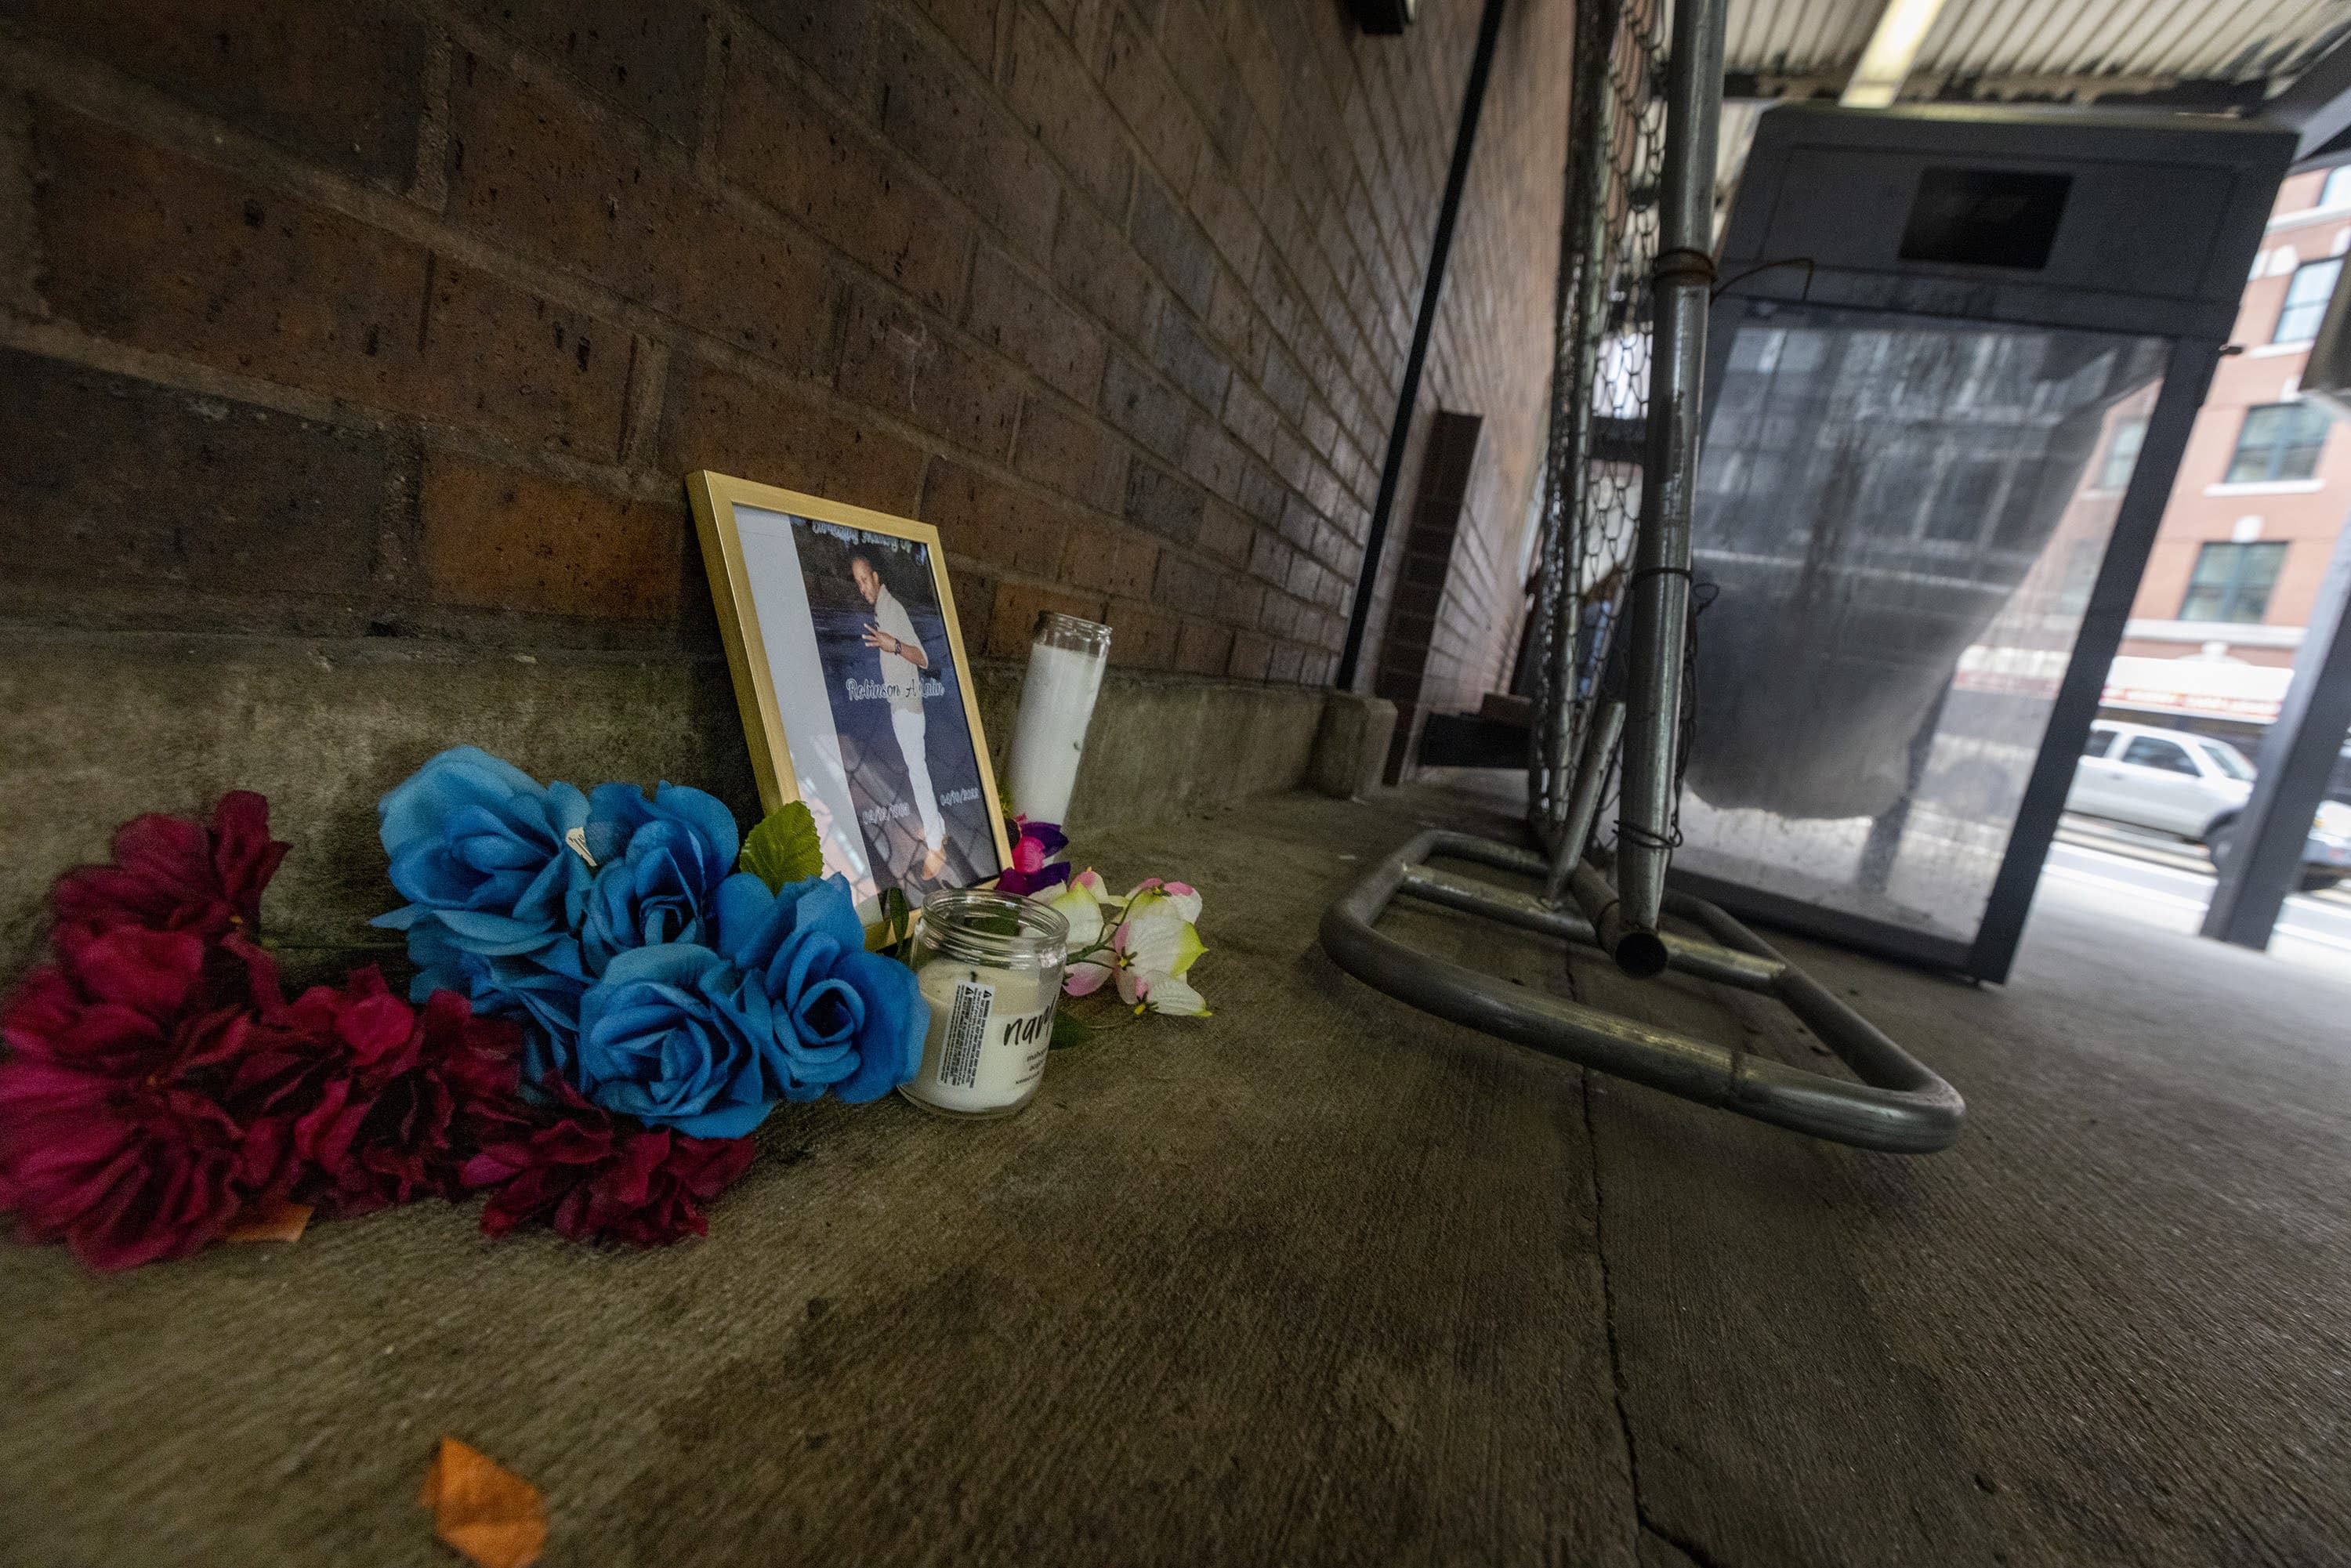 A small memorial for Robinson Lalin at the Broadway MBTA Red Line station. (Jesse Costa/WBUR)